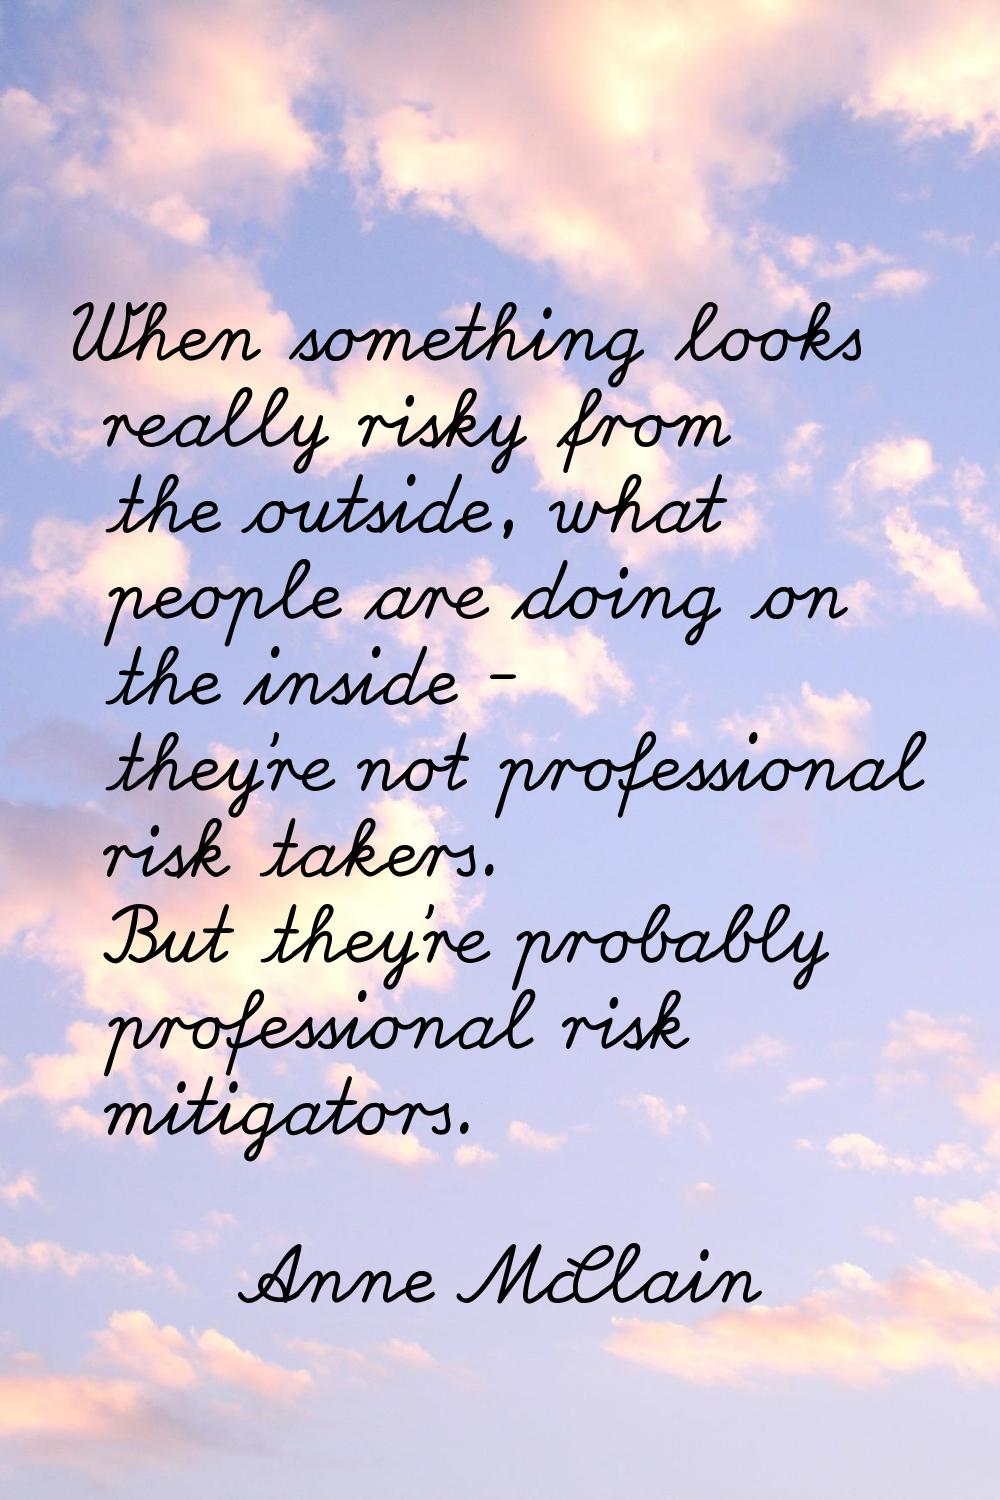 When something looks really risky from the outside, what people are doing on the inside - they're n